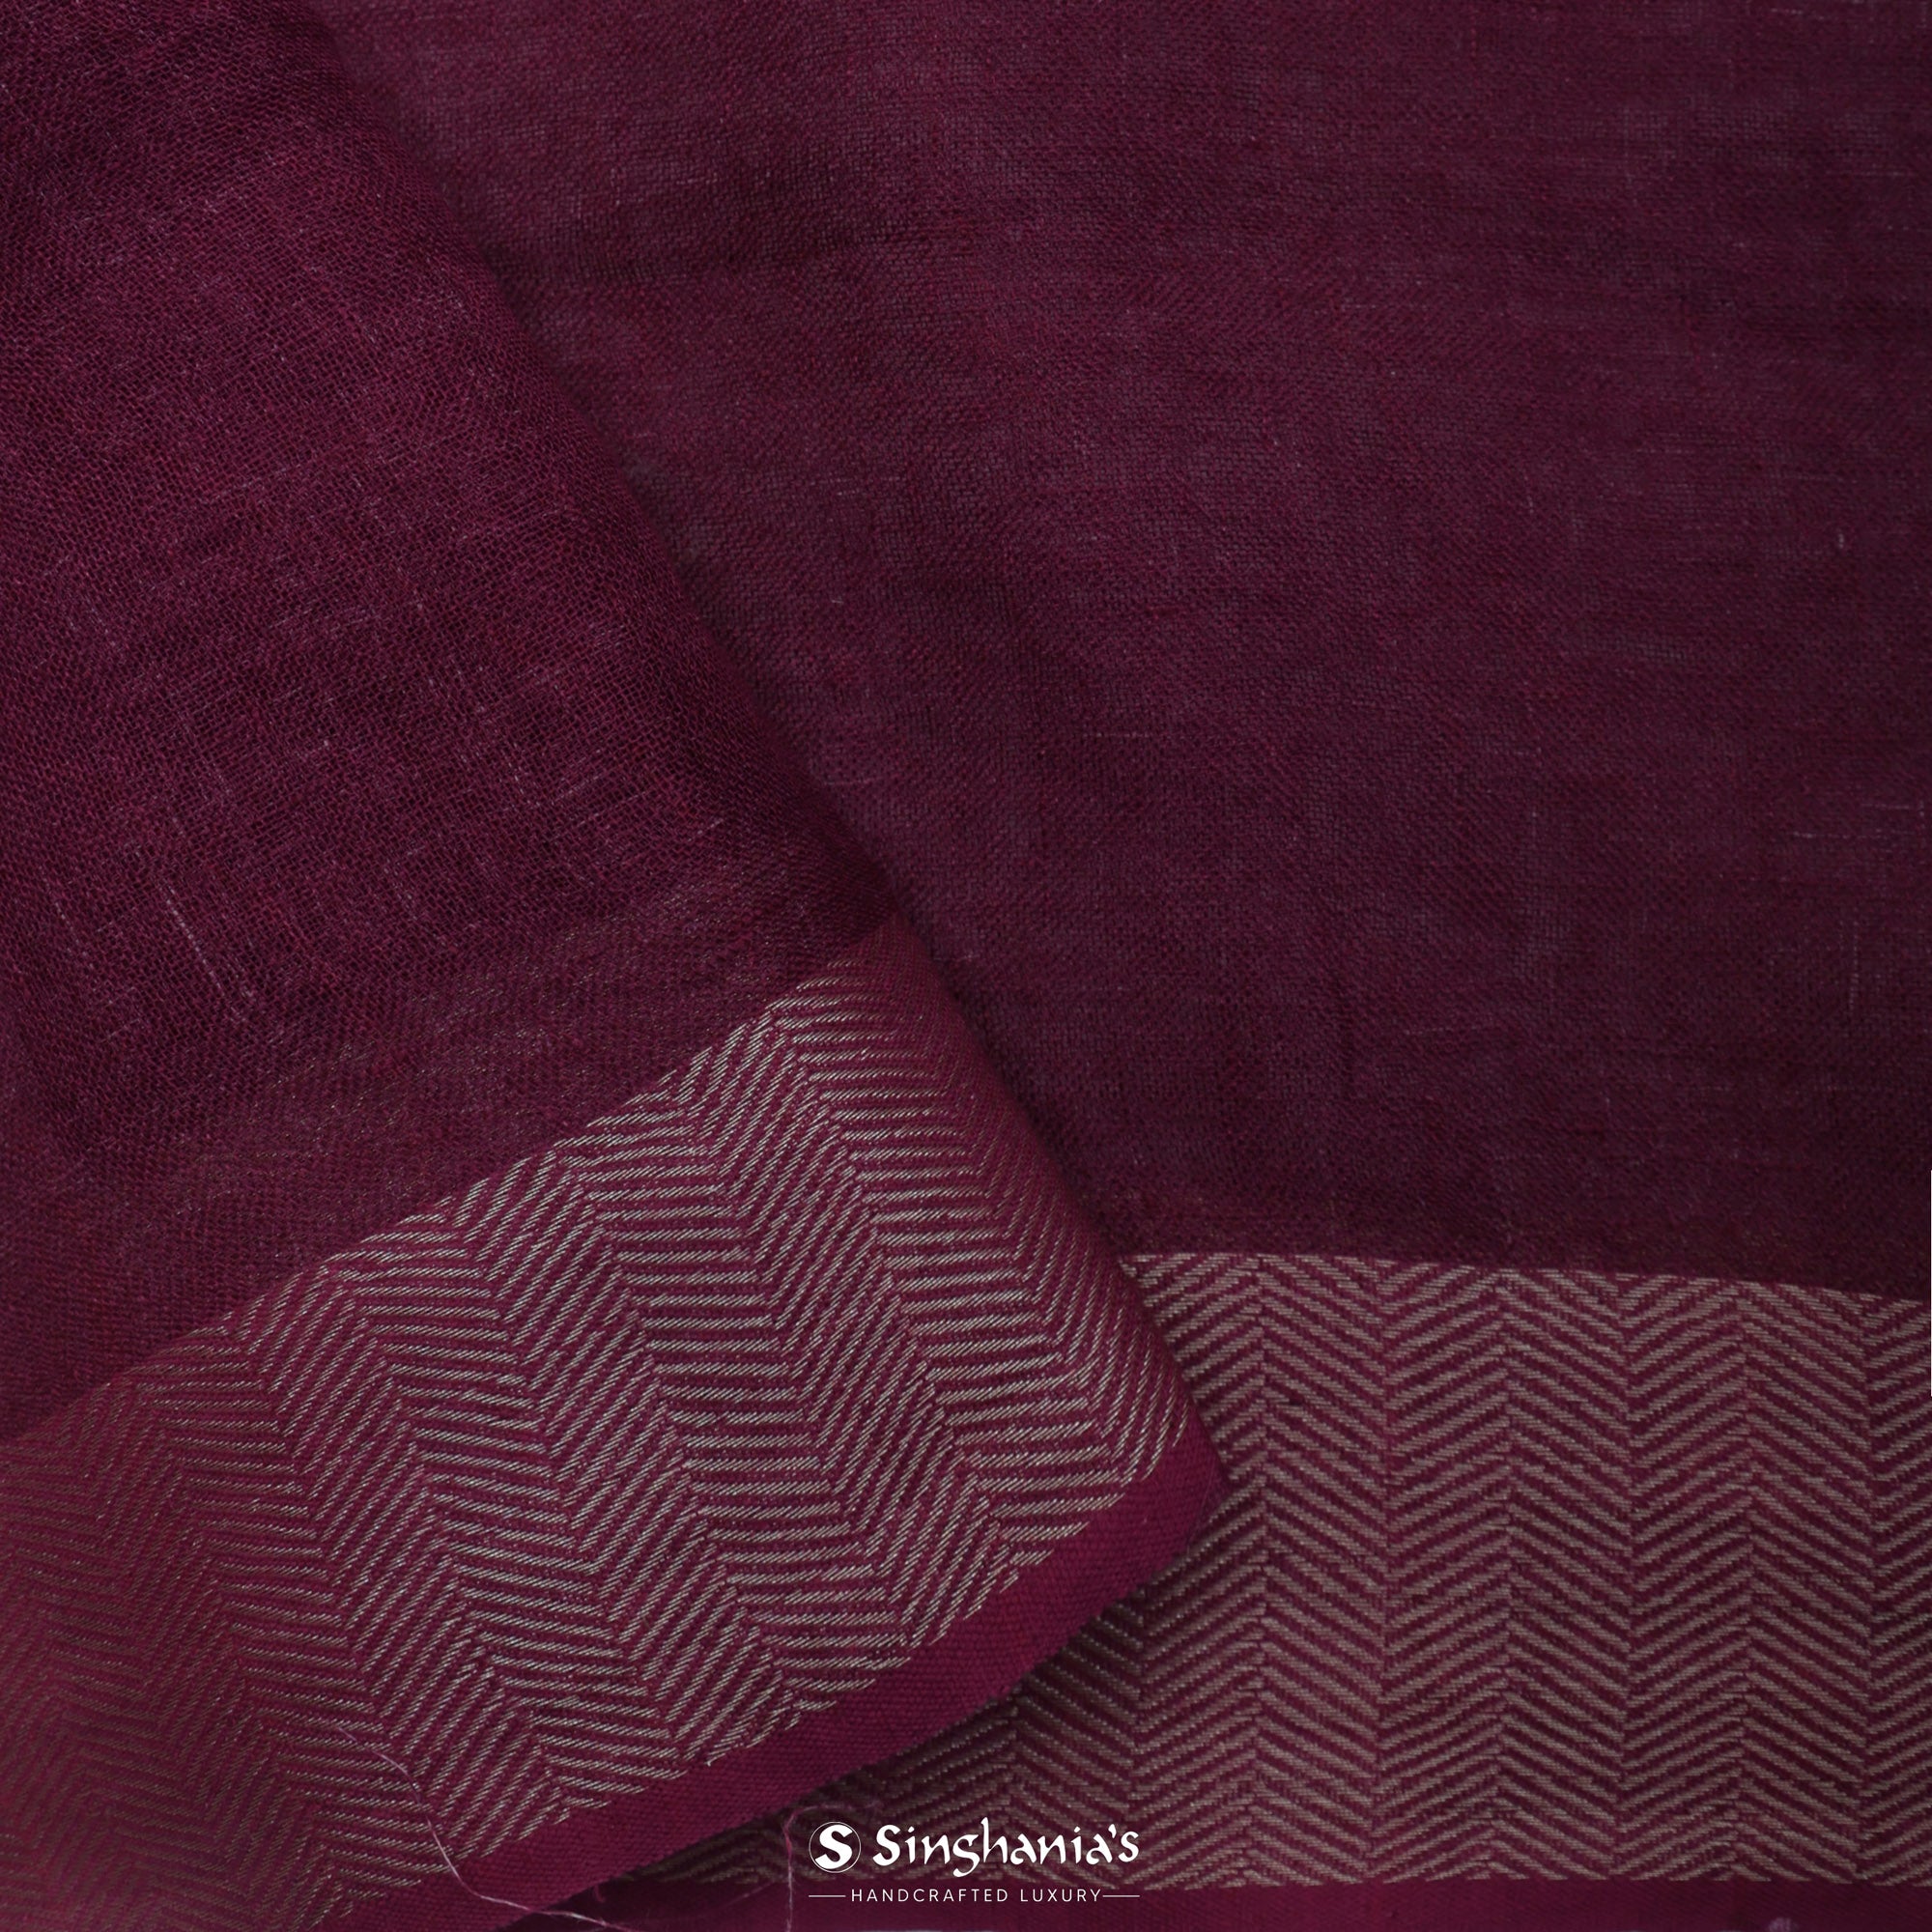 Wine Purple Printed Linen Saree With Floral Jaal Pattern